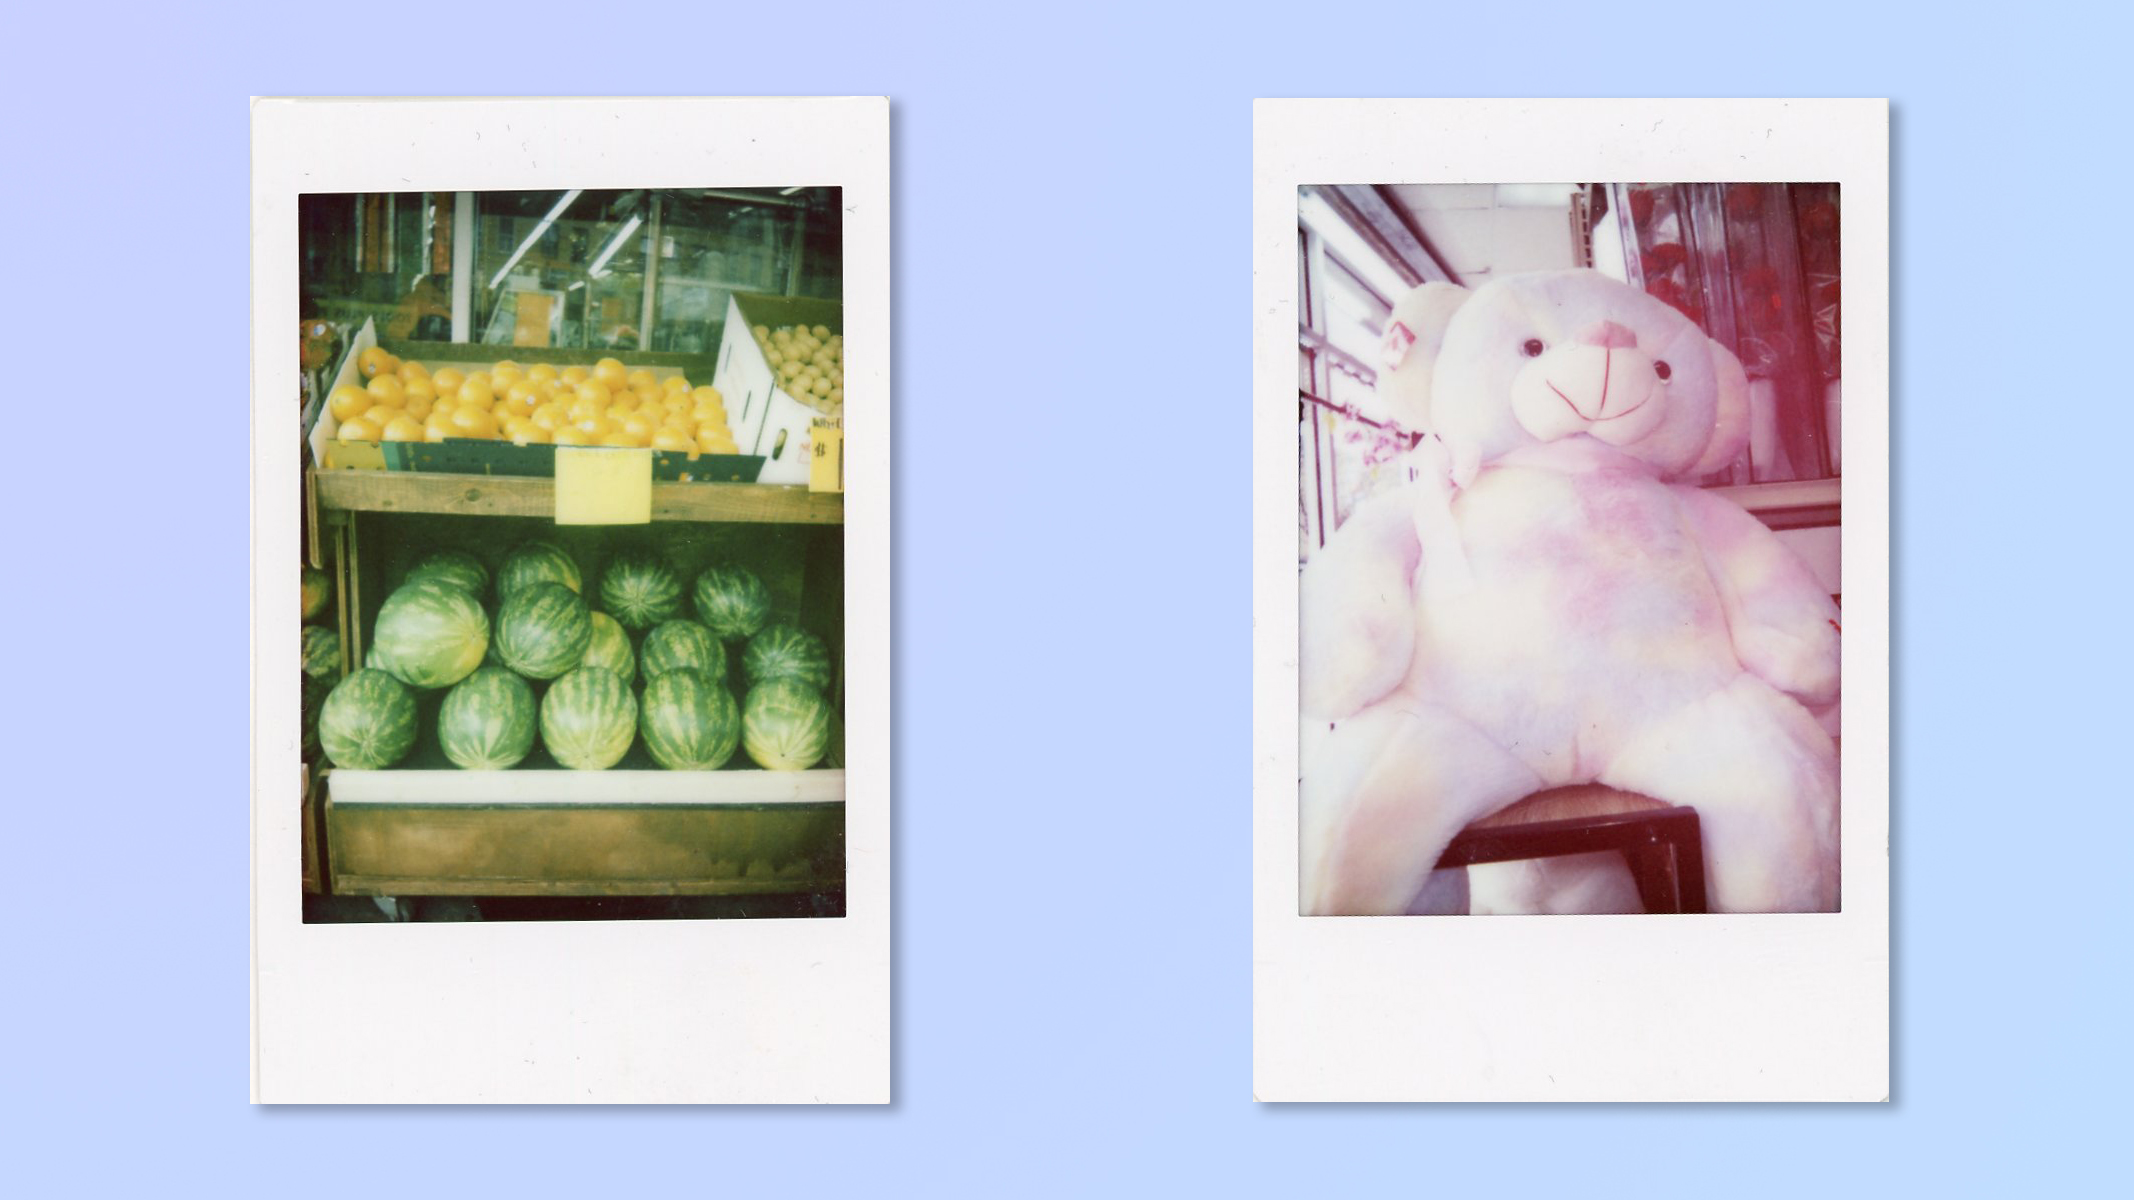 Two Instax photo prints scanned and overlaid on a blue background. All taken on a Fujifilm Instax mini 99 showing Faded Green and Soft Magenta filters. The left image in Faded Green is of a market stall full of watermelons. The right picture is of a giant teddy bear in Soft Magenta filter.